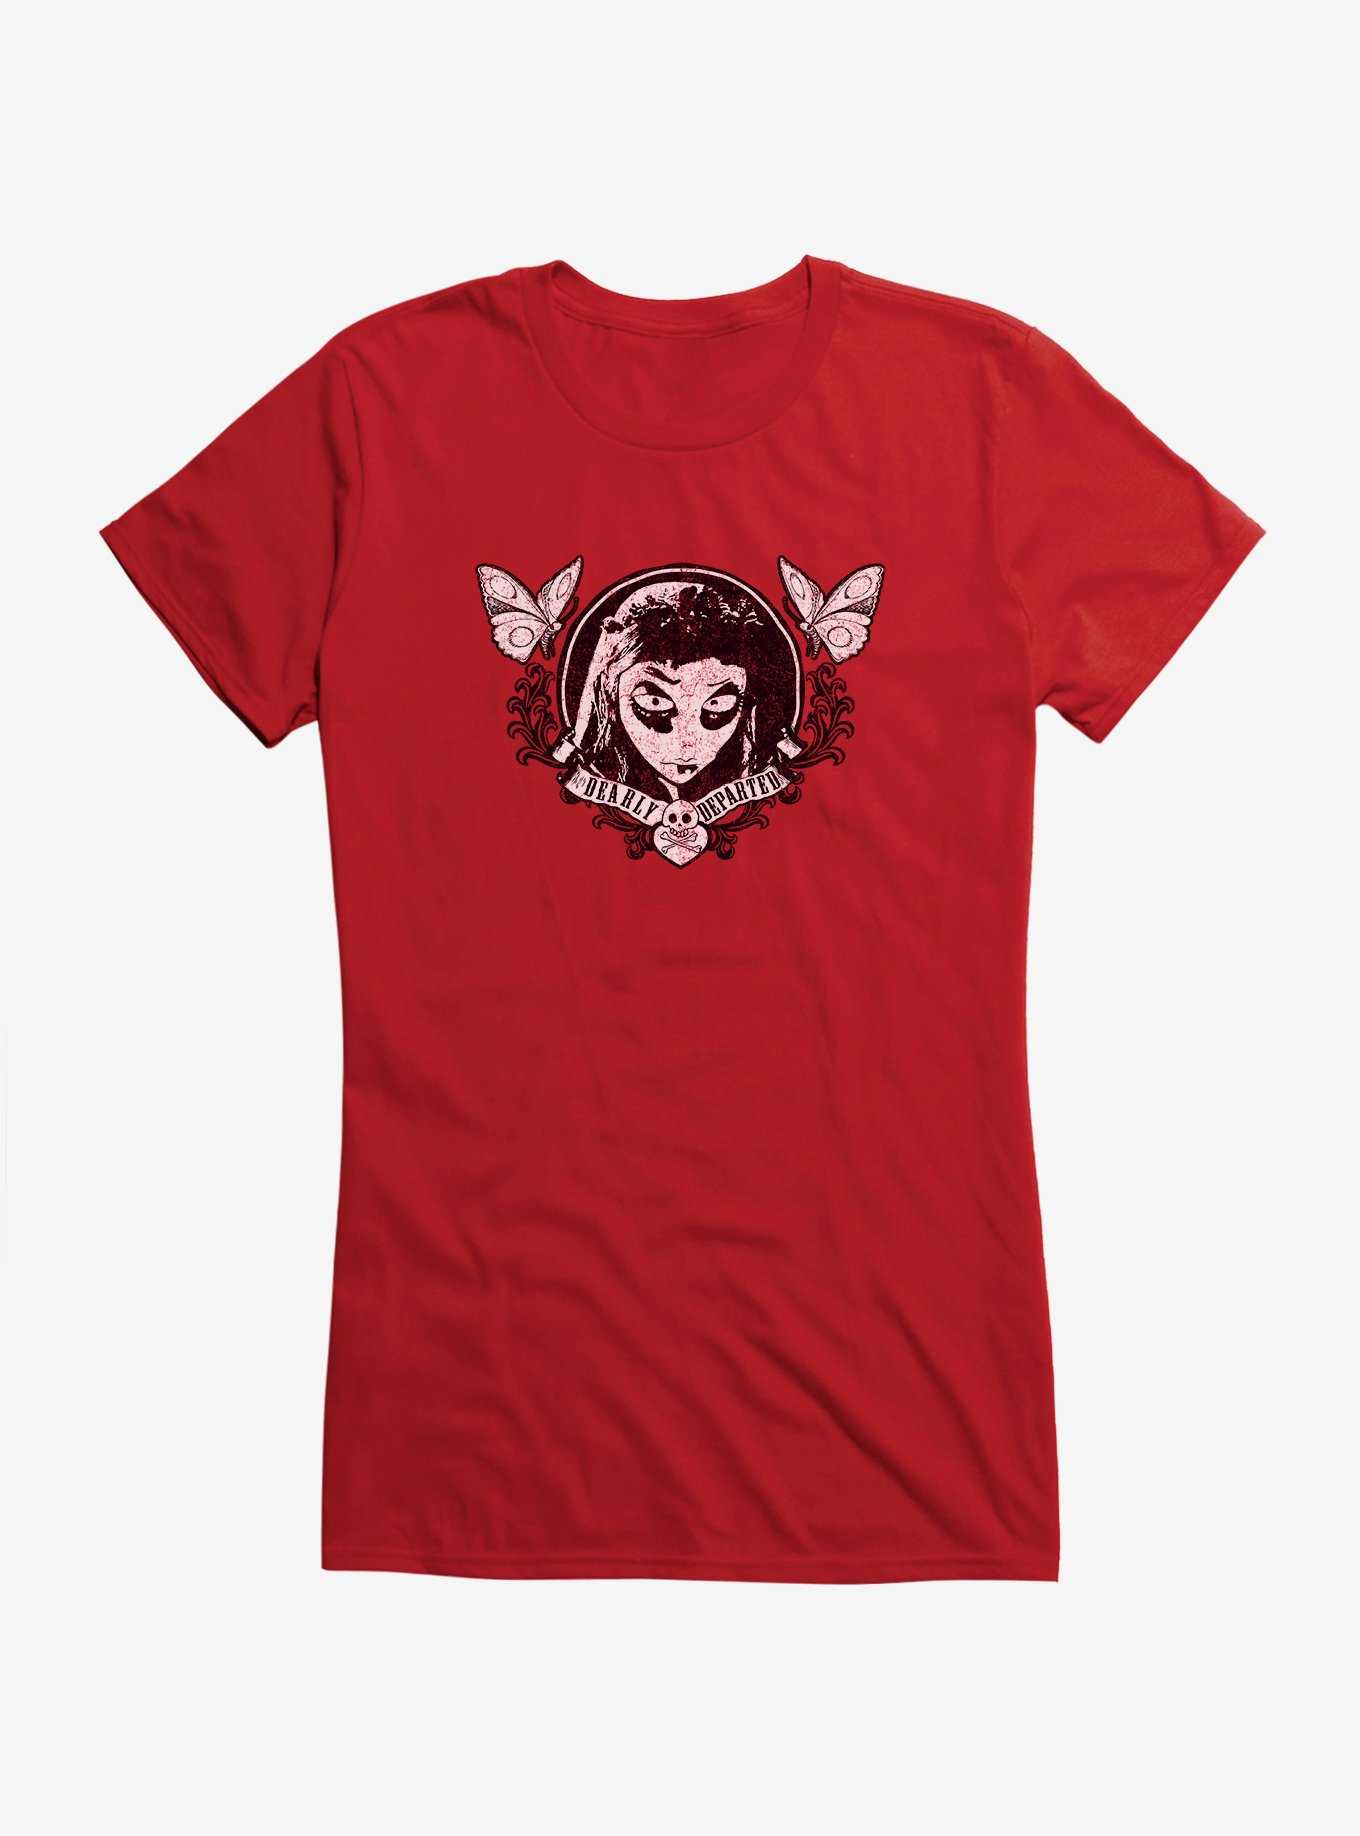 Corpse Bride Emily Dearly Departed Girls T-Shirt, RED, hi-res